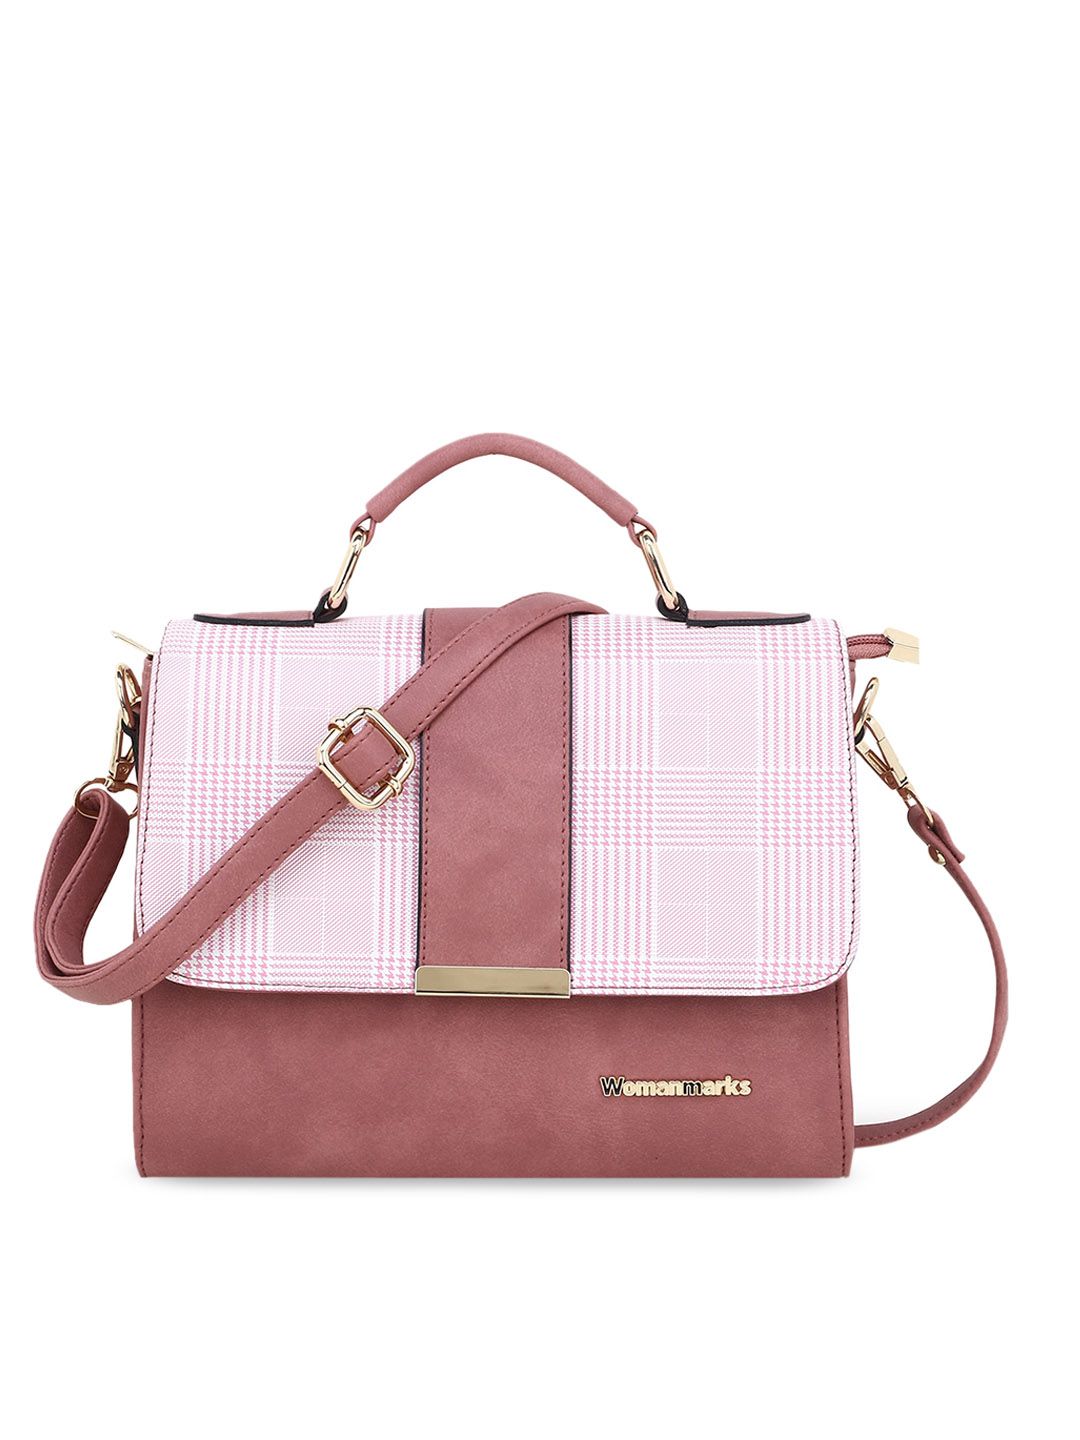 WOMEN MARKS Pink Checked Sling Bag Price in India